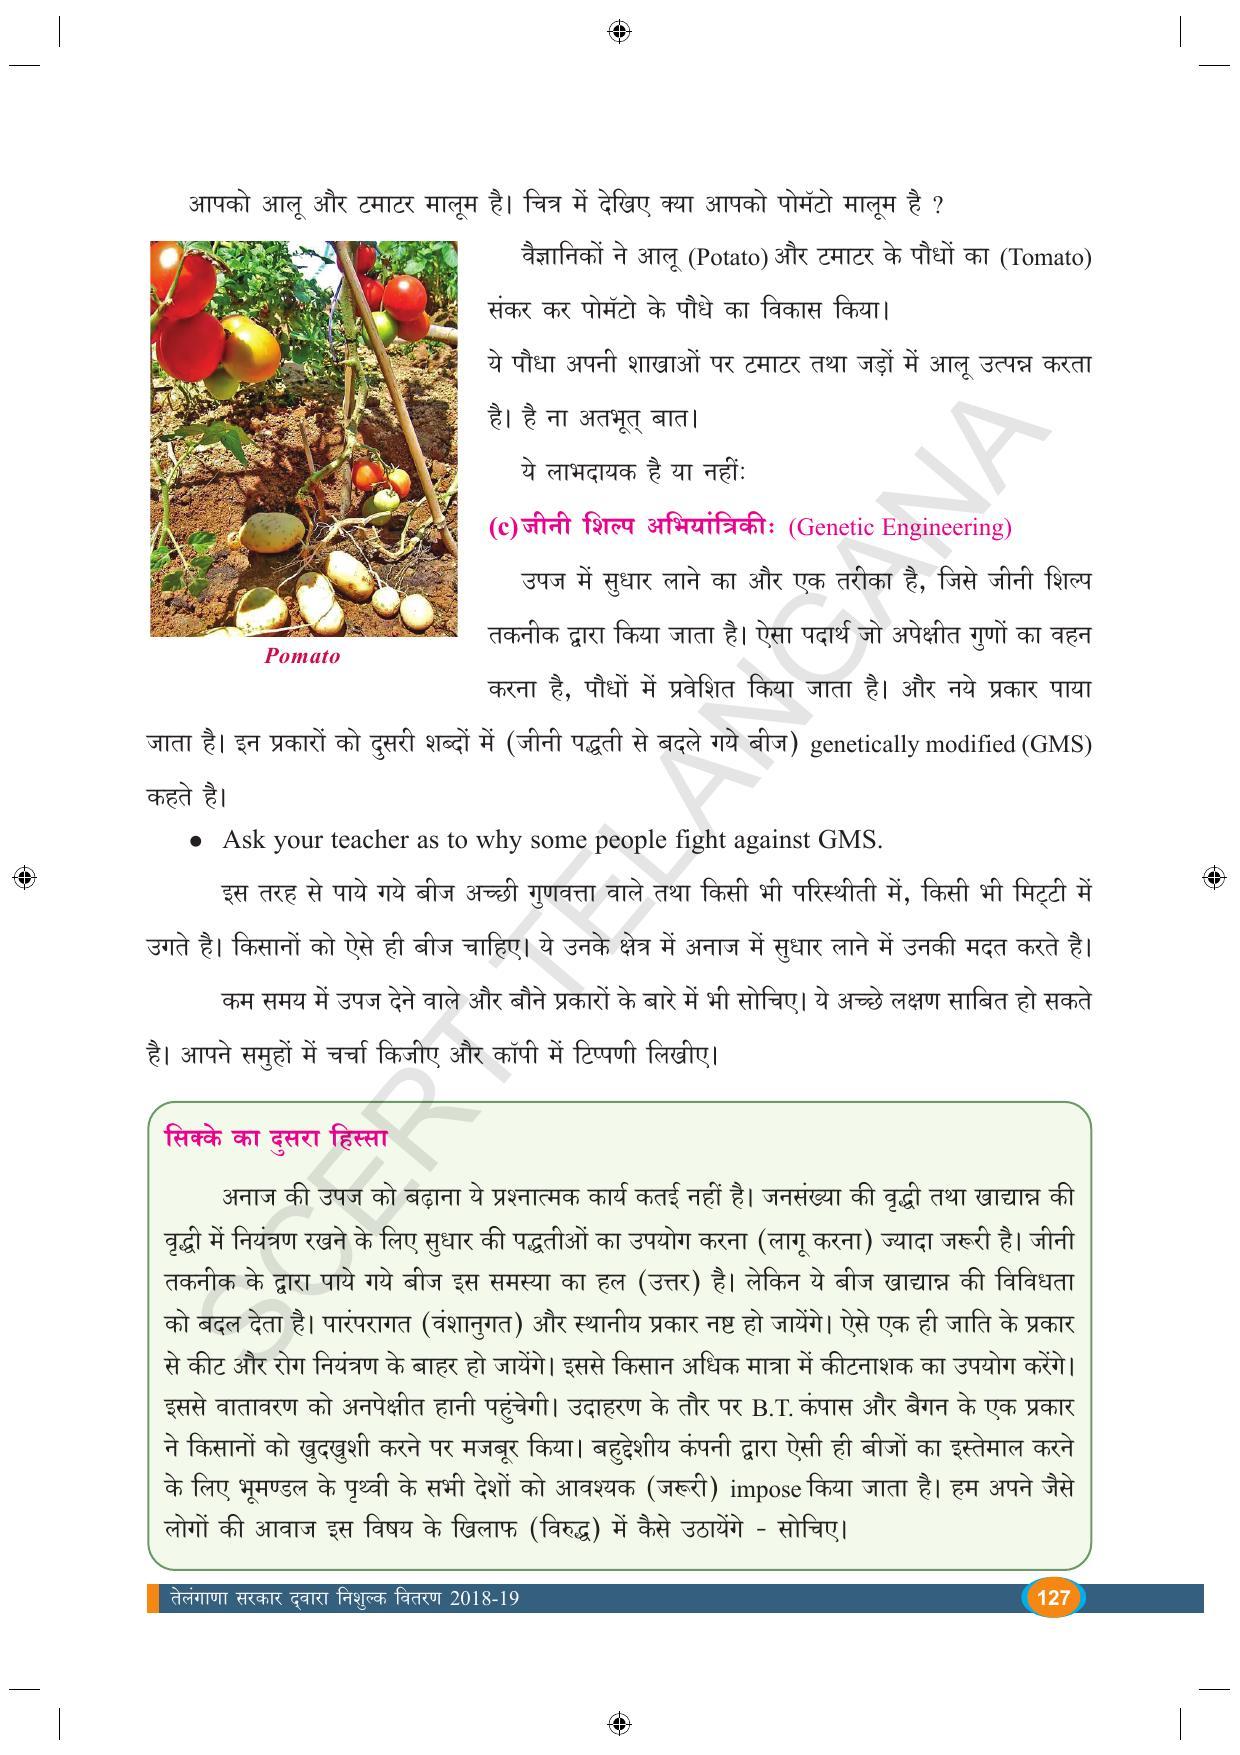 TS SCERT Class 9 Biological Science (Hindi Medium) Text Book - Page 139